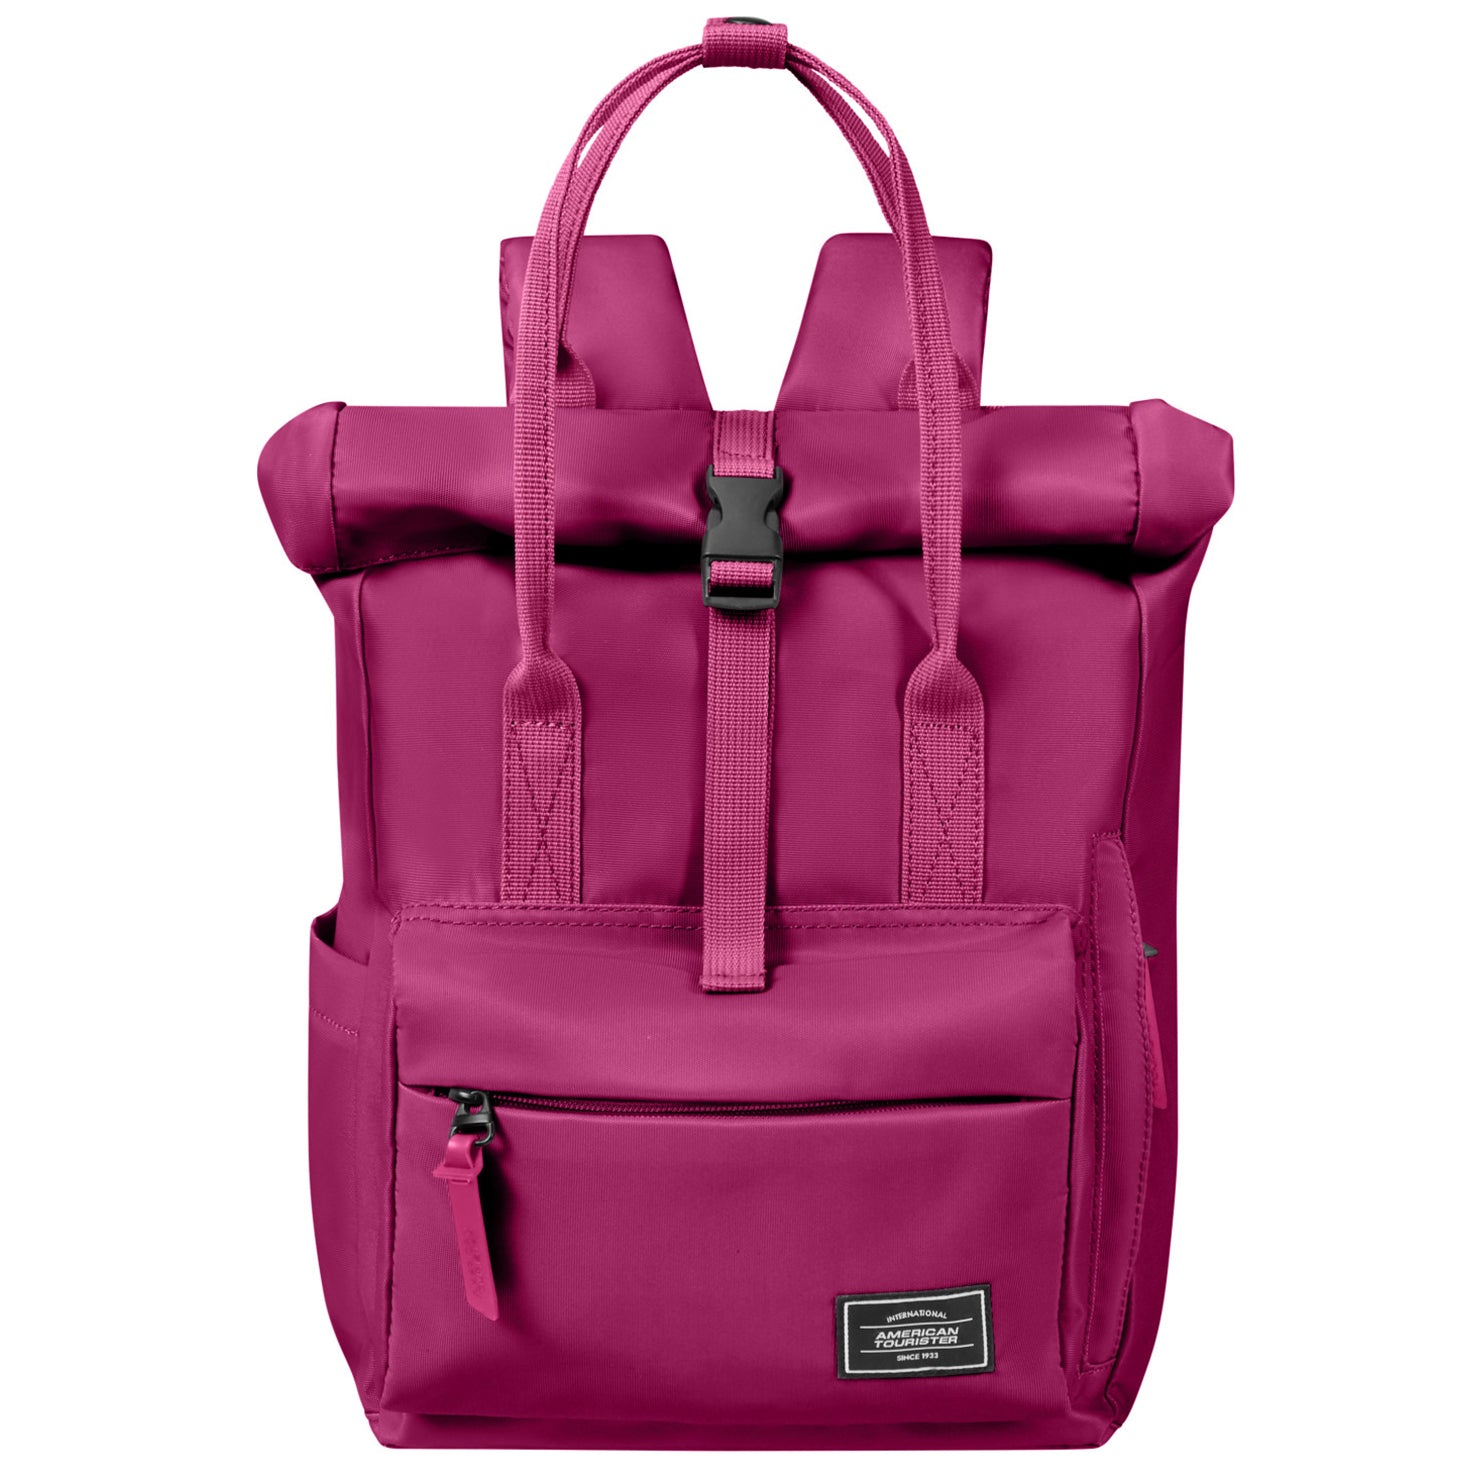 American Tourister Urban Groove City Backpack 36 cm - Deep Orchid